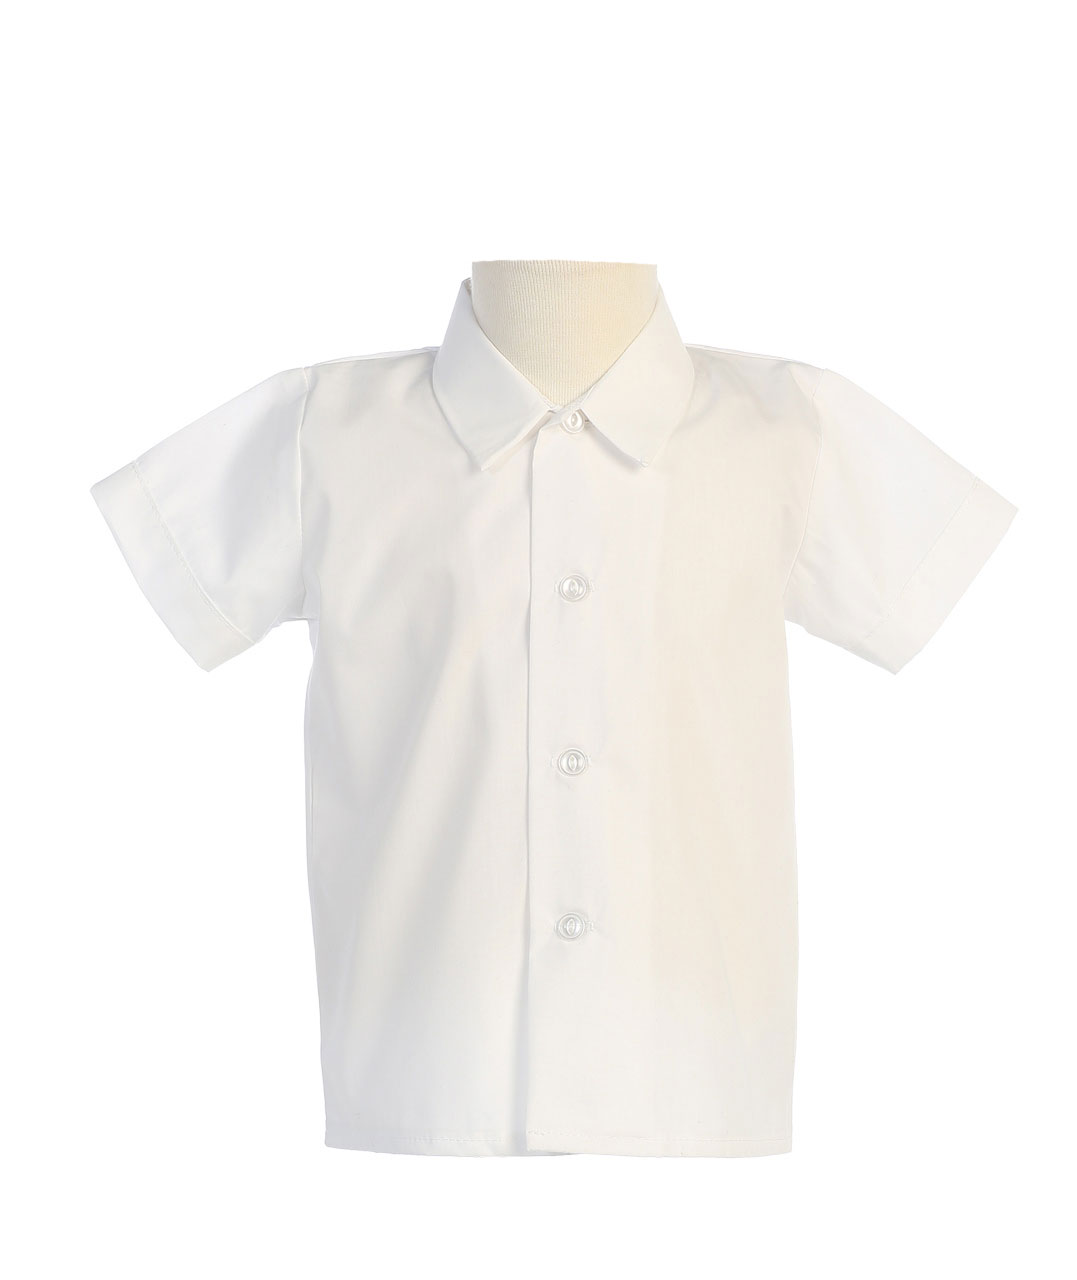 Boys Short Sleeved Simple Dress Shirt - Available in White 5